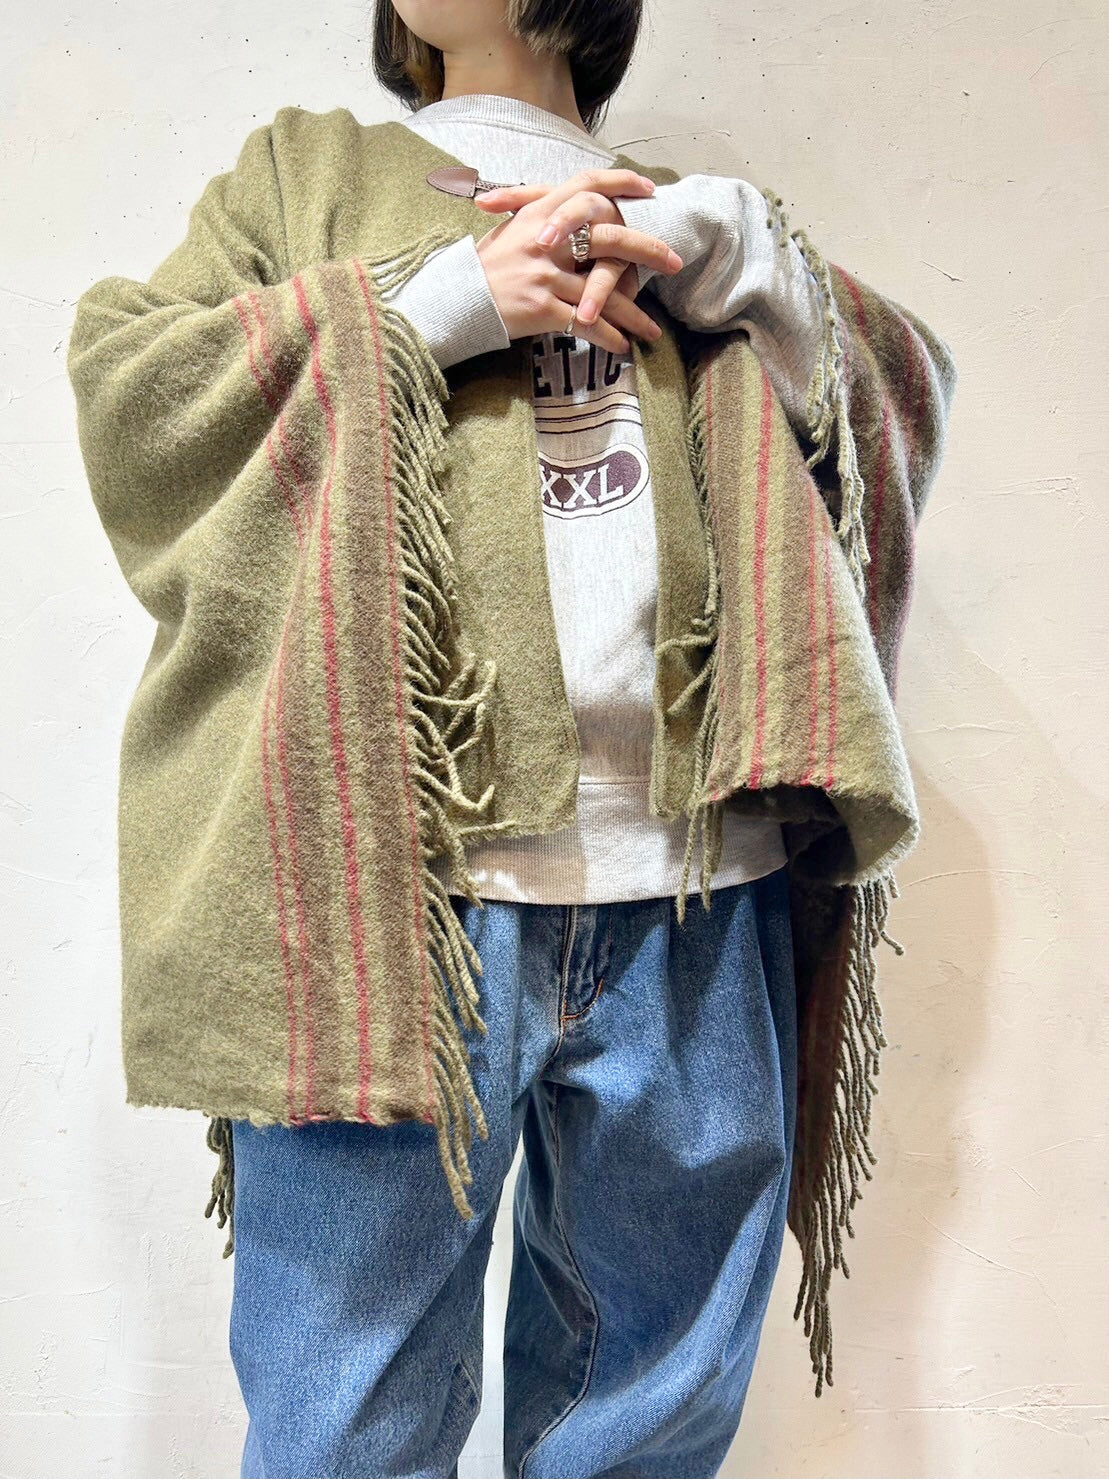 Vintage Cape MADE IN ITALY 〜RalphLauren〜 [L25683]